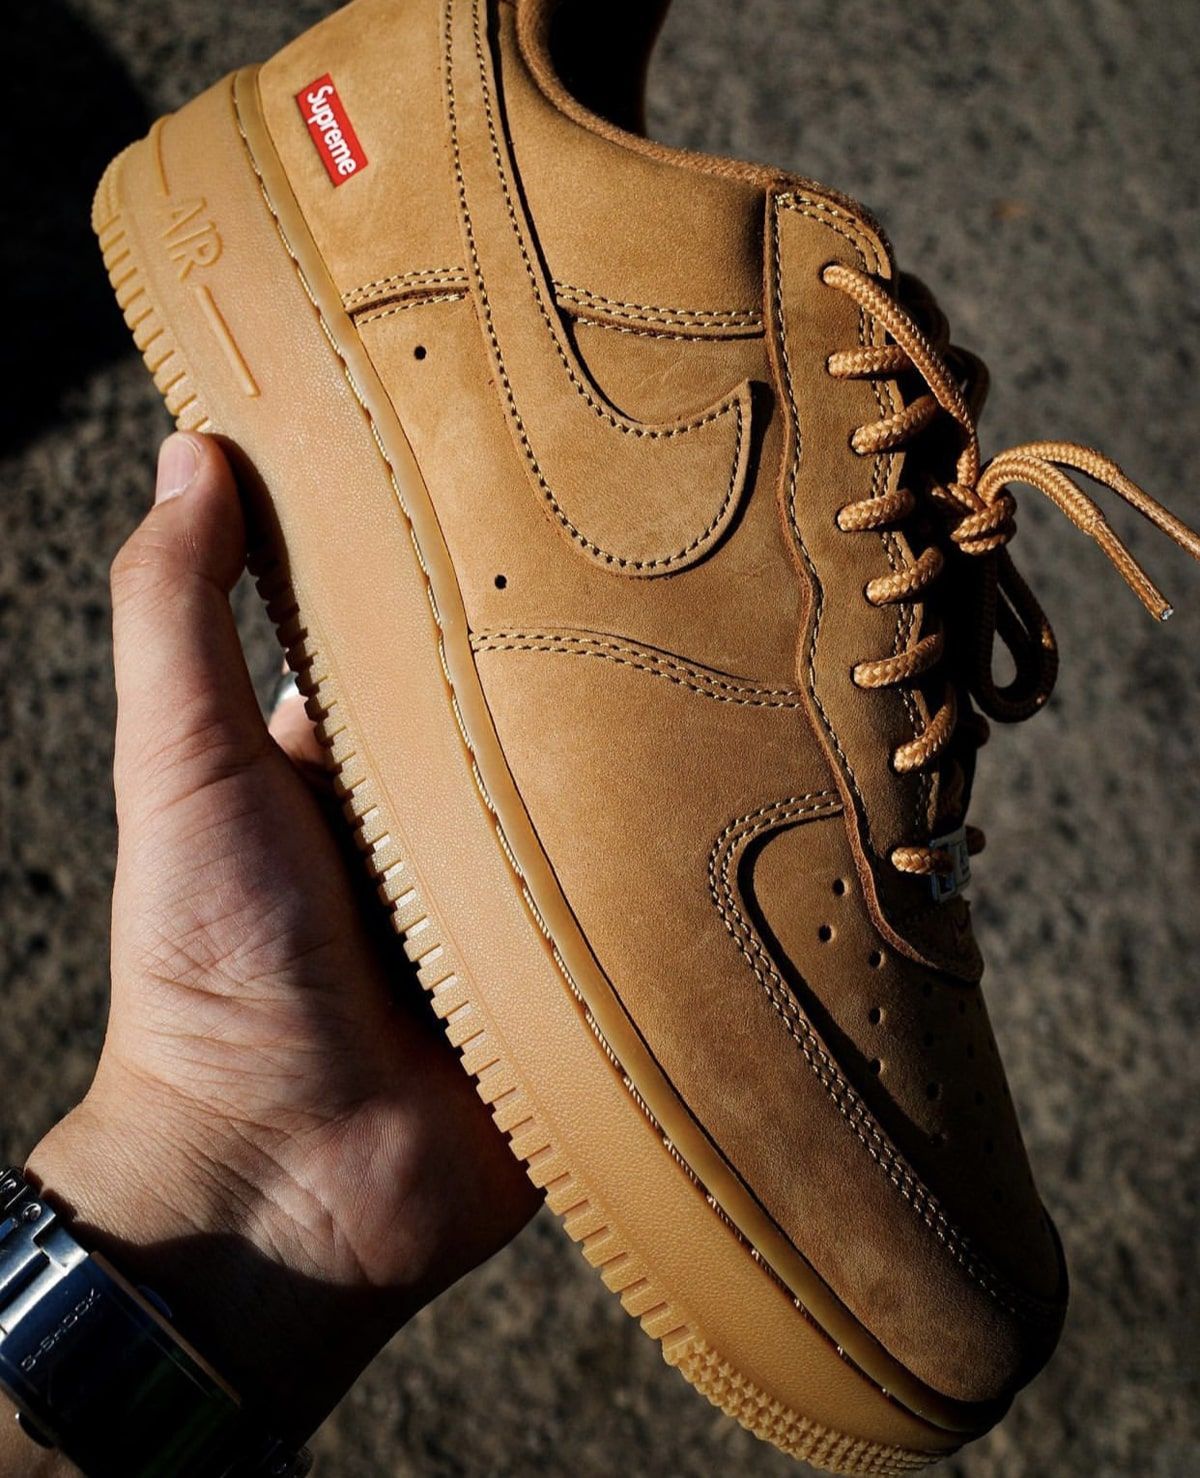 Supreme x Nike Air Force 1 Low “Flax” Confirmed for FW21 | House